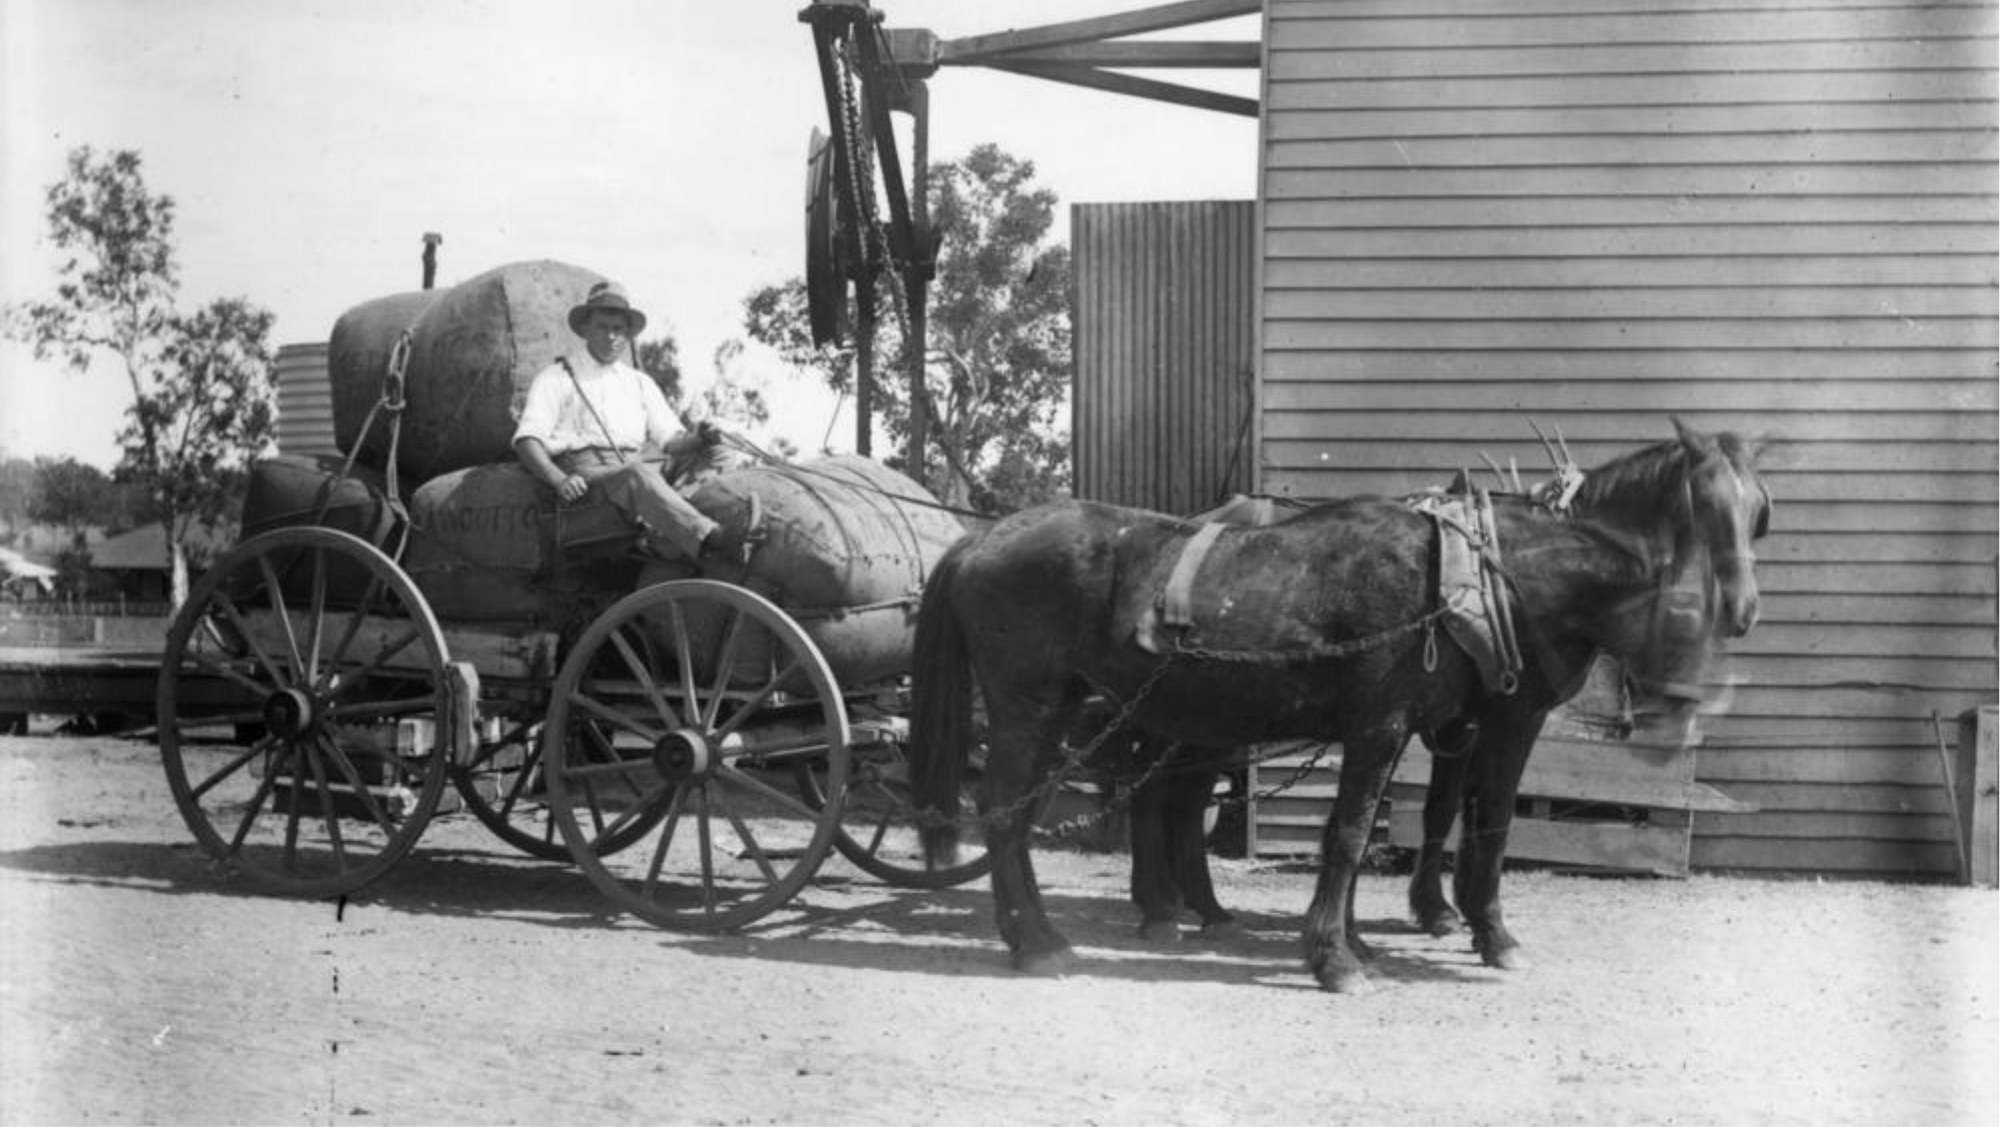 Black and white image of a man on a horse and cart